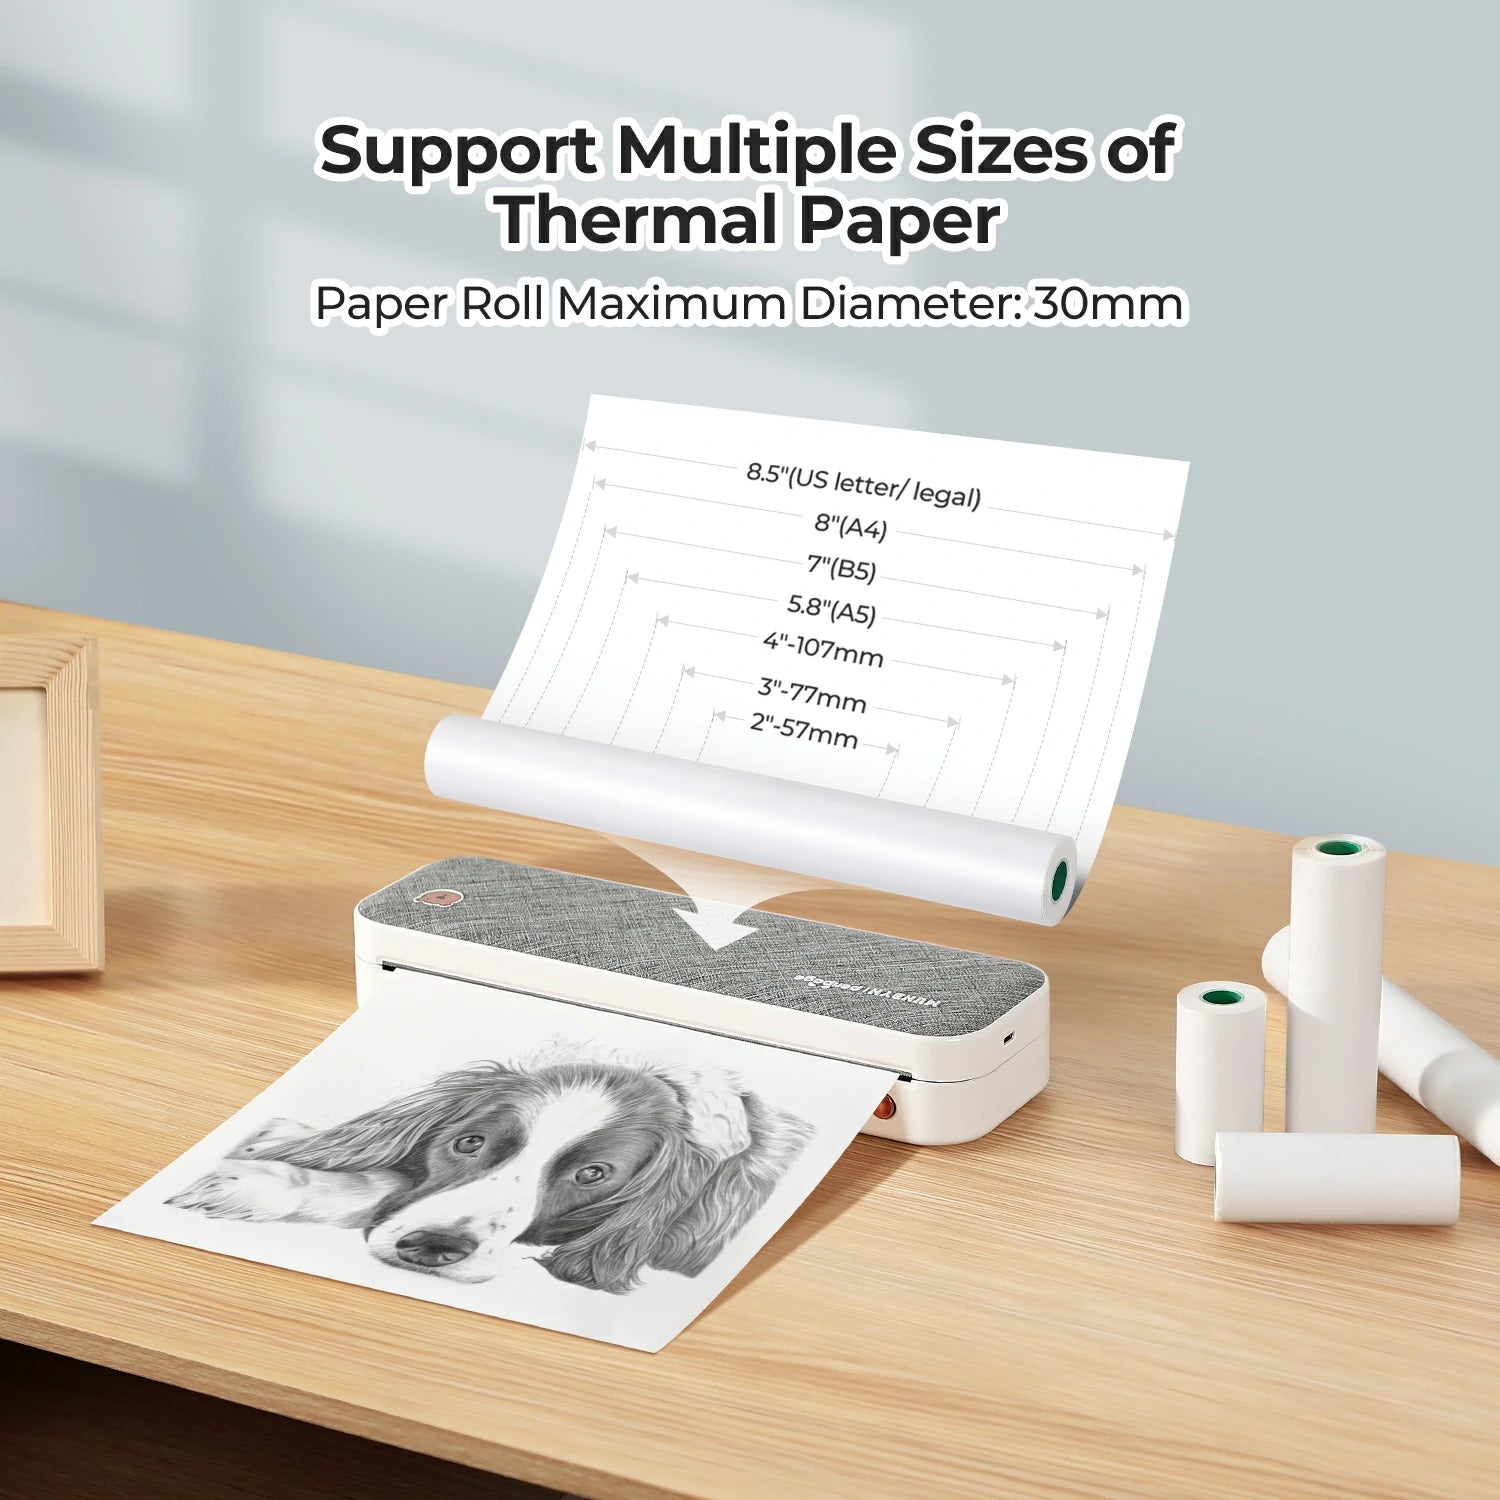 MUNBYN A4 portable thermal printer supports multiple sizes of thermal paper.